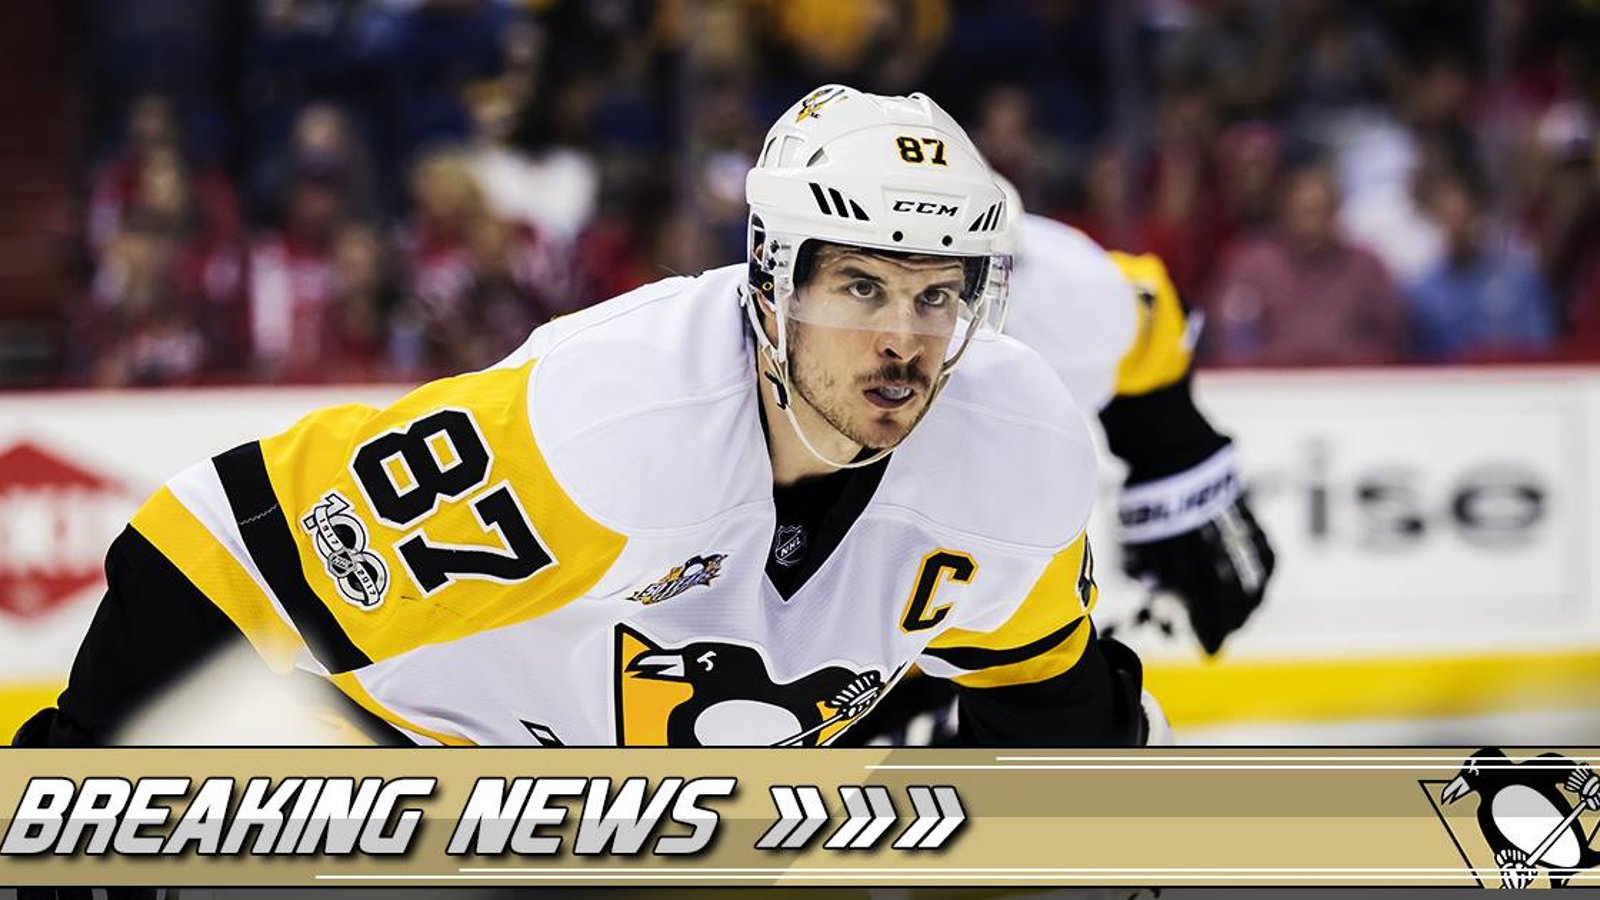 Breaking: Sidney Crosby responds to “concussion” talk after Game 6.